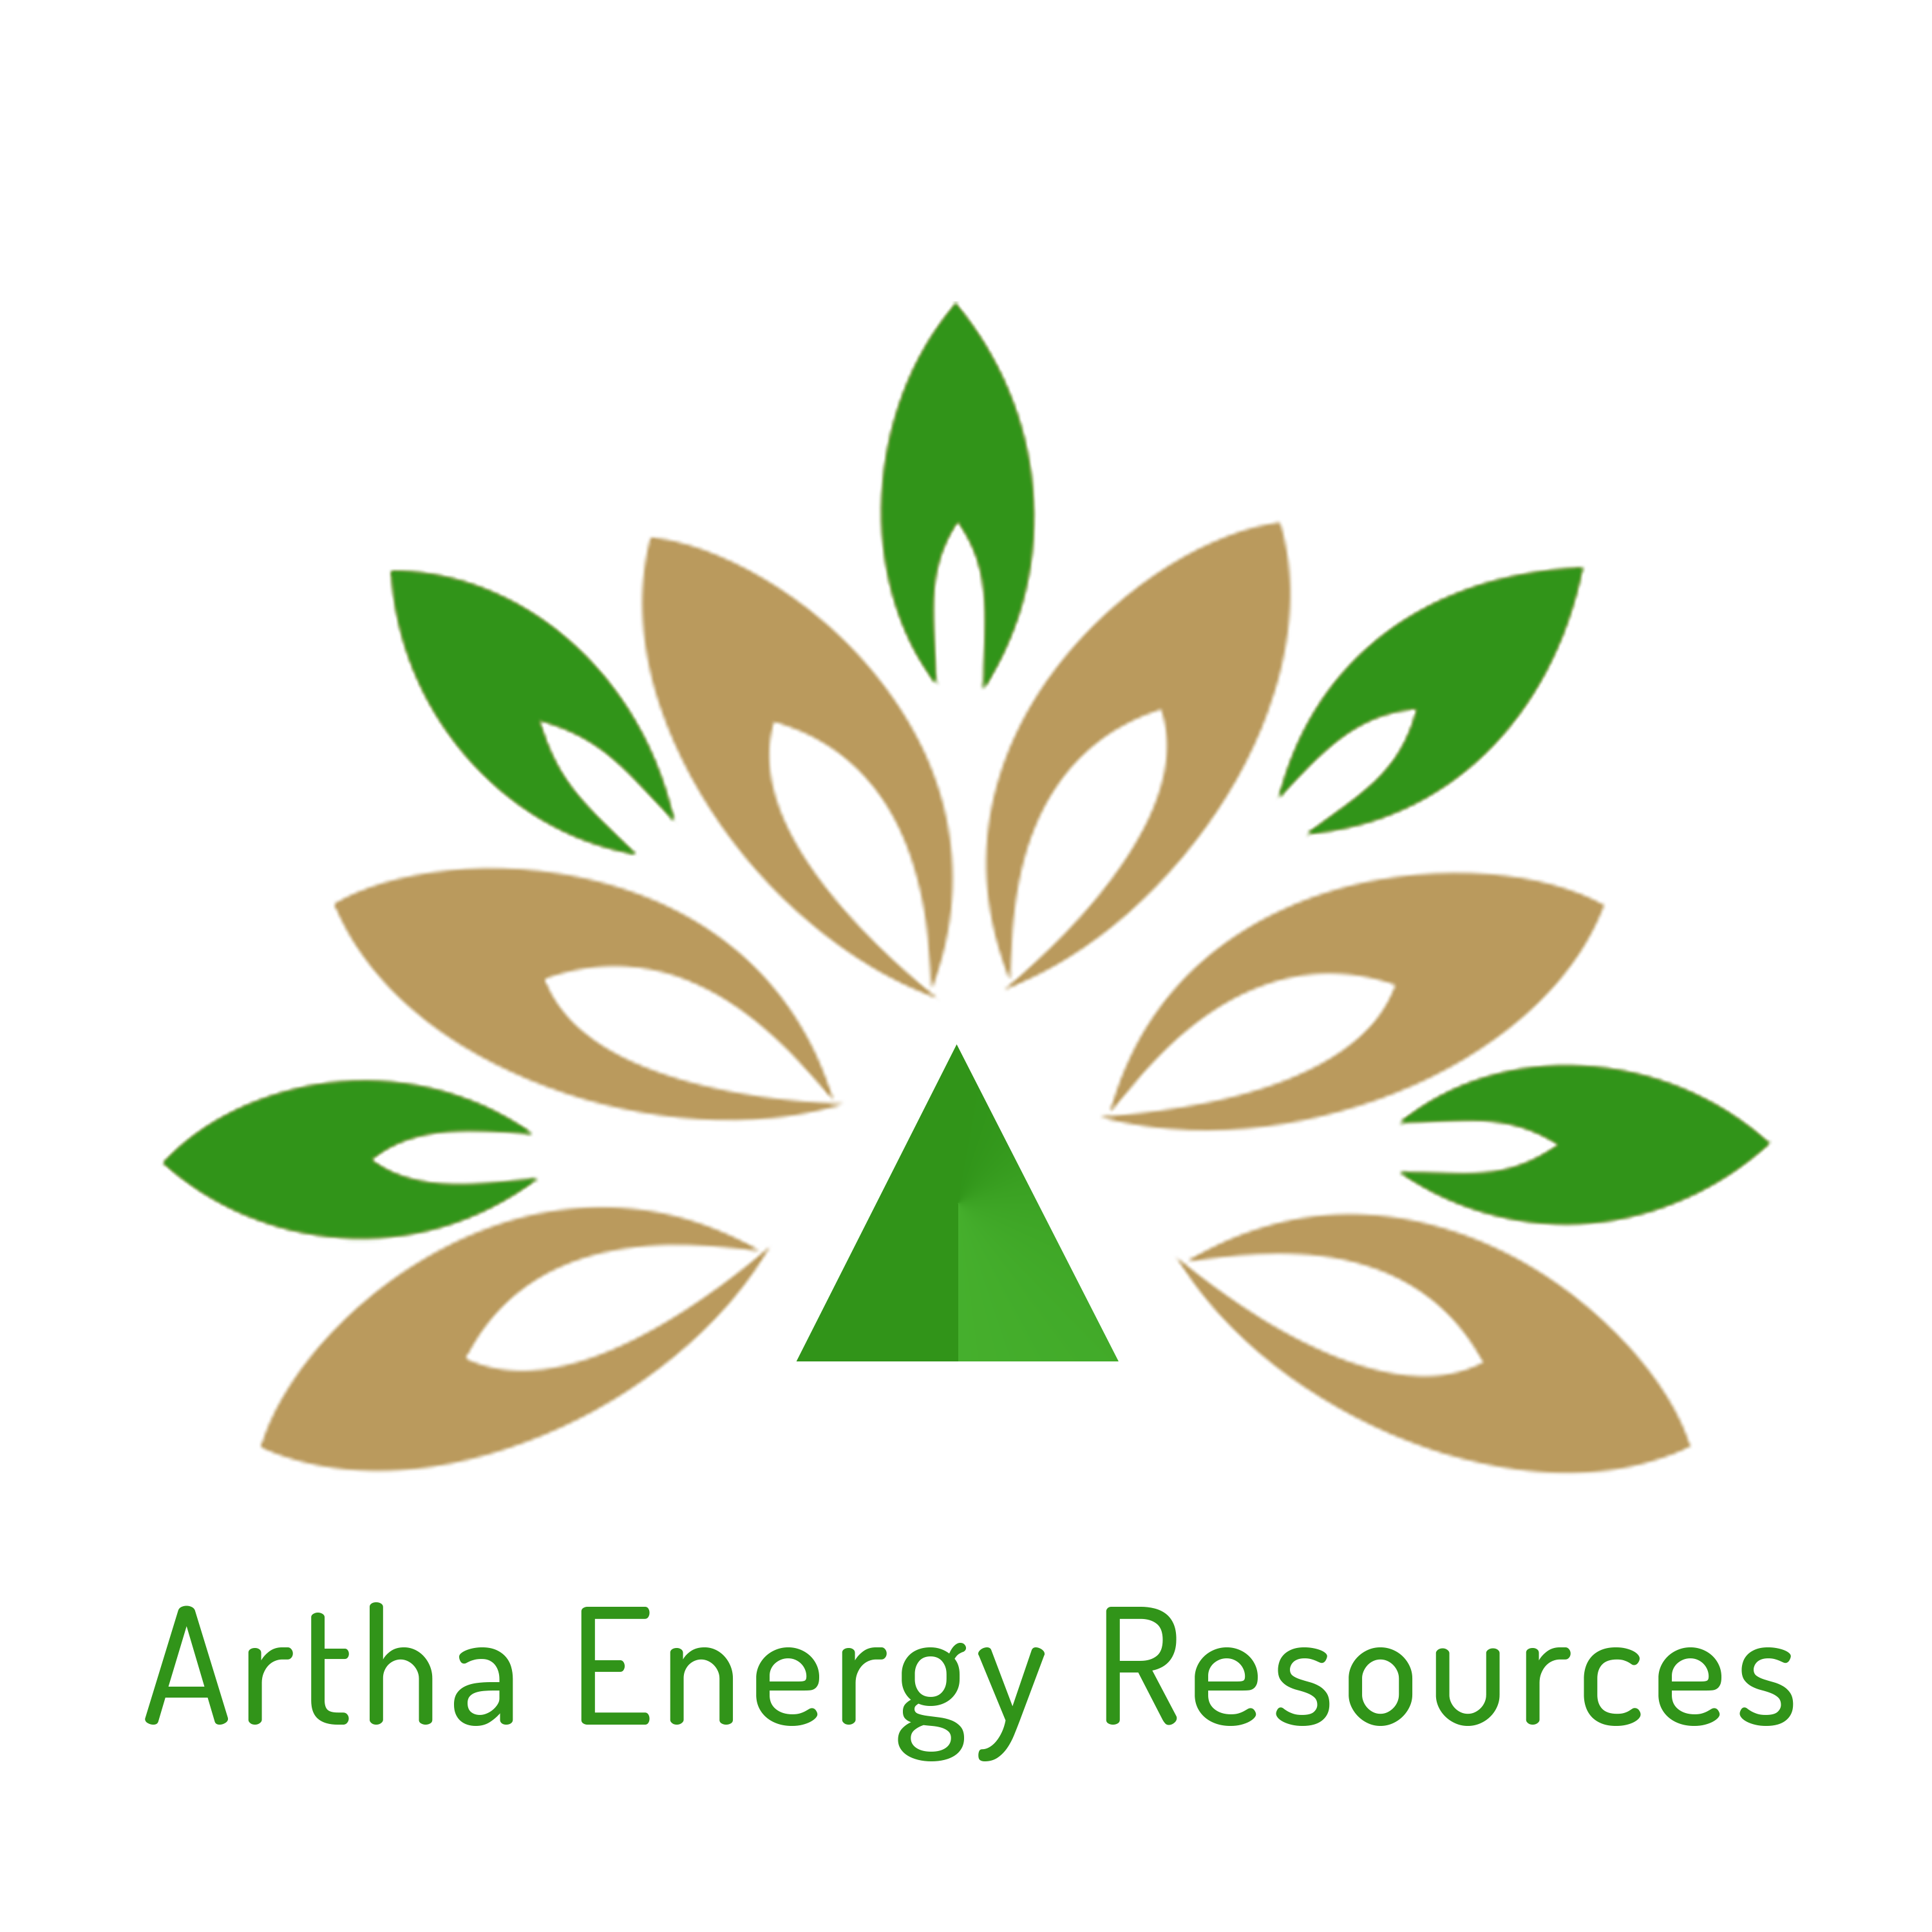 In an exclusive talk with Animesh Damani, Managing Partner – Artha Energy Resources